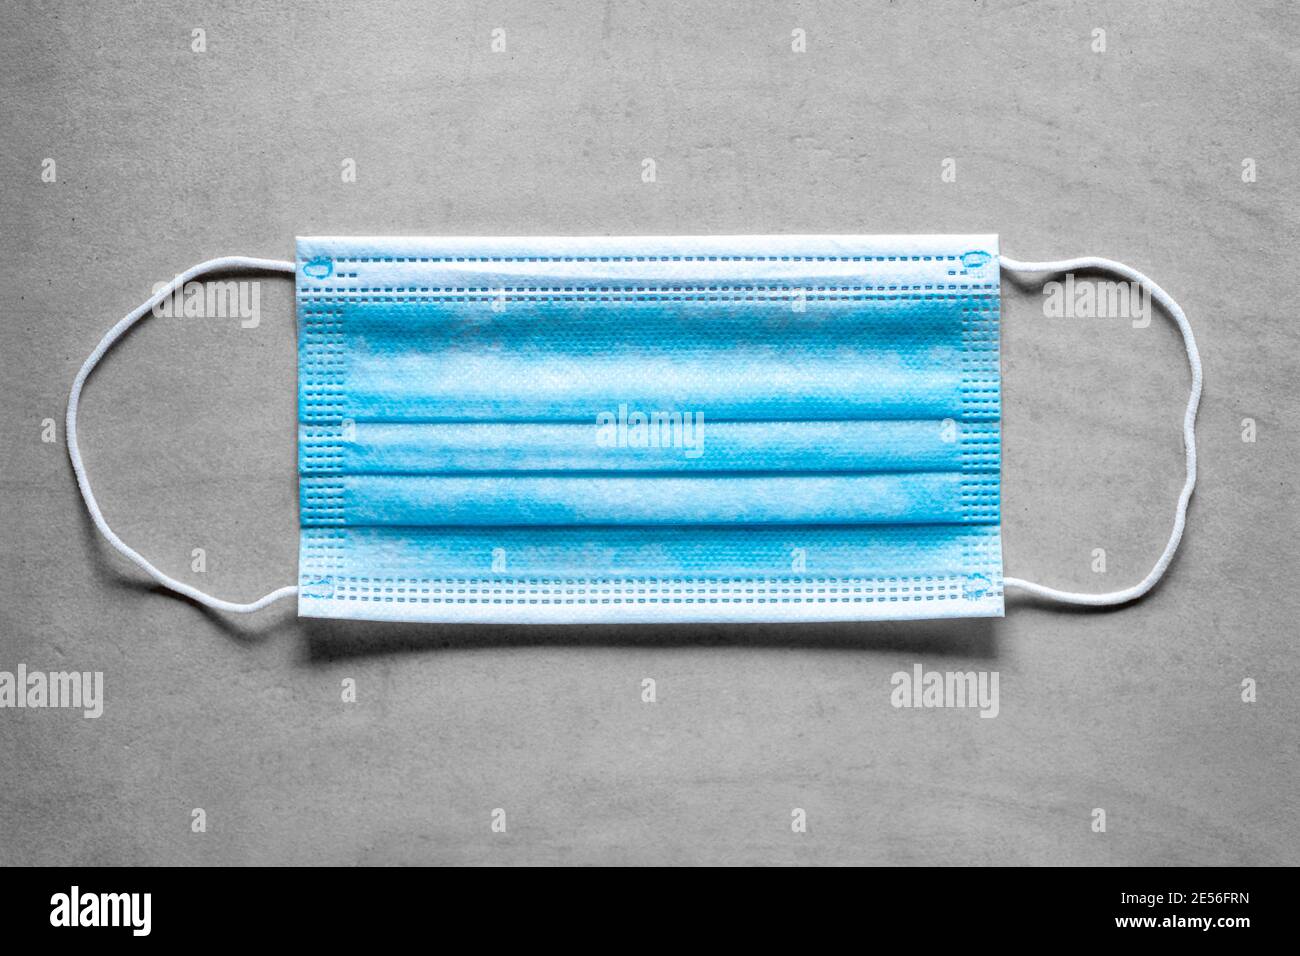 Covid-19 medical surgical face mask. Coronavirus mouth protection on gray background Stock Photo